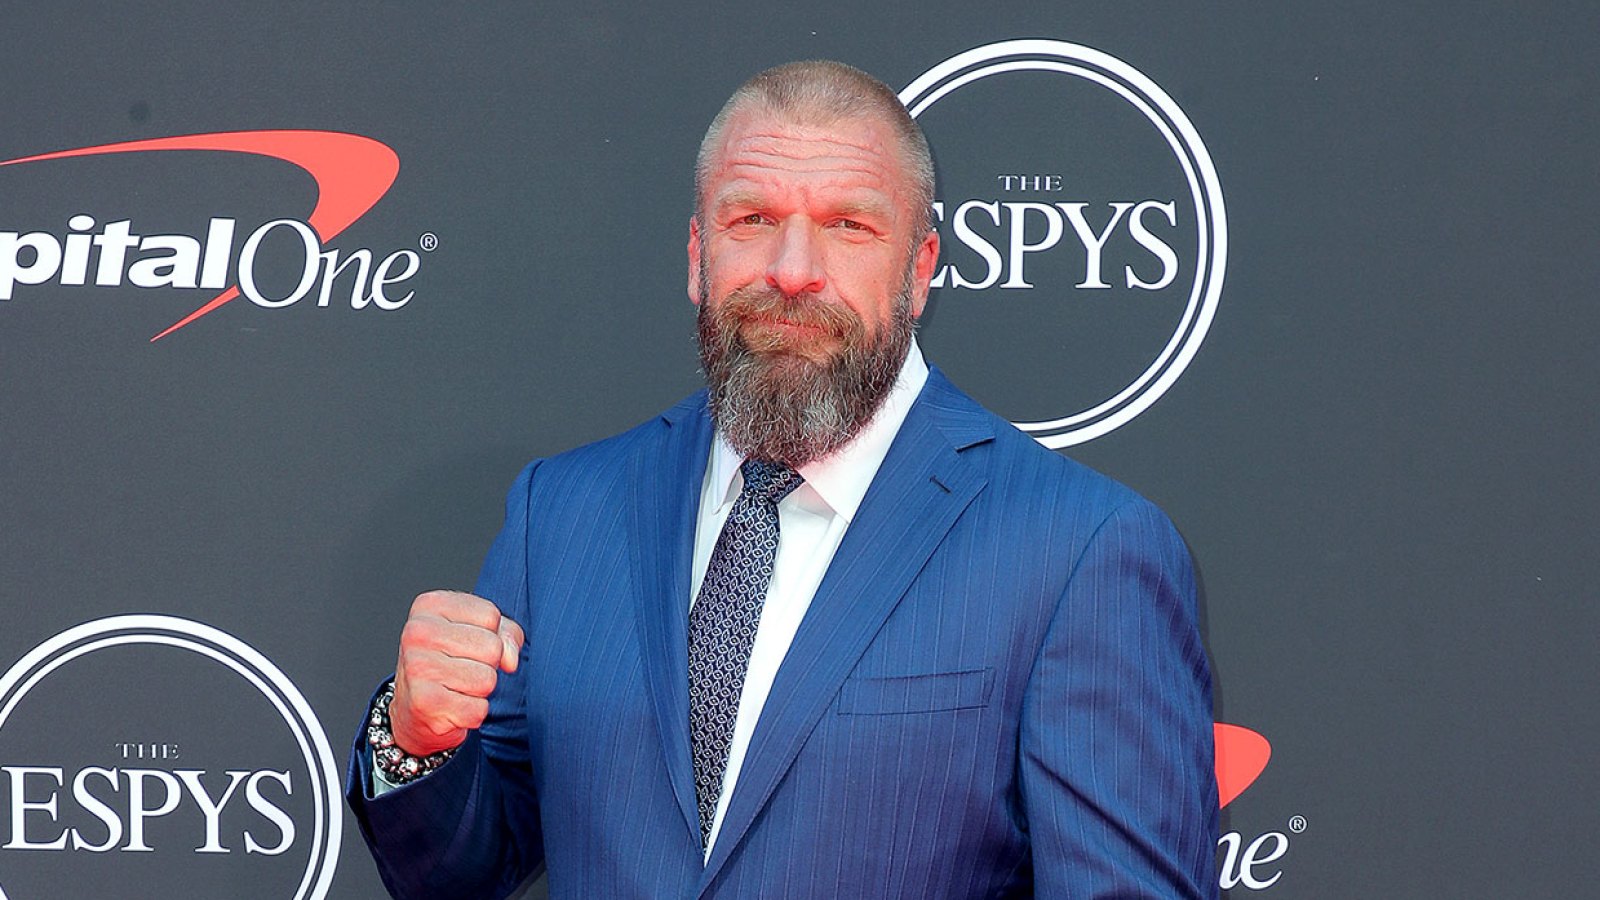 Triple H Retires From WWE Due to Heart Failure